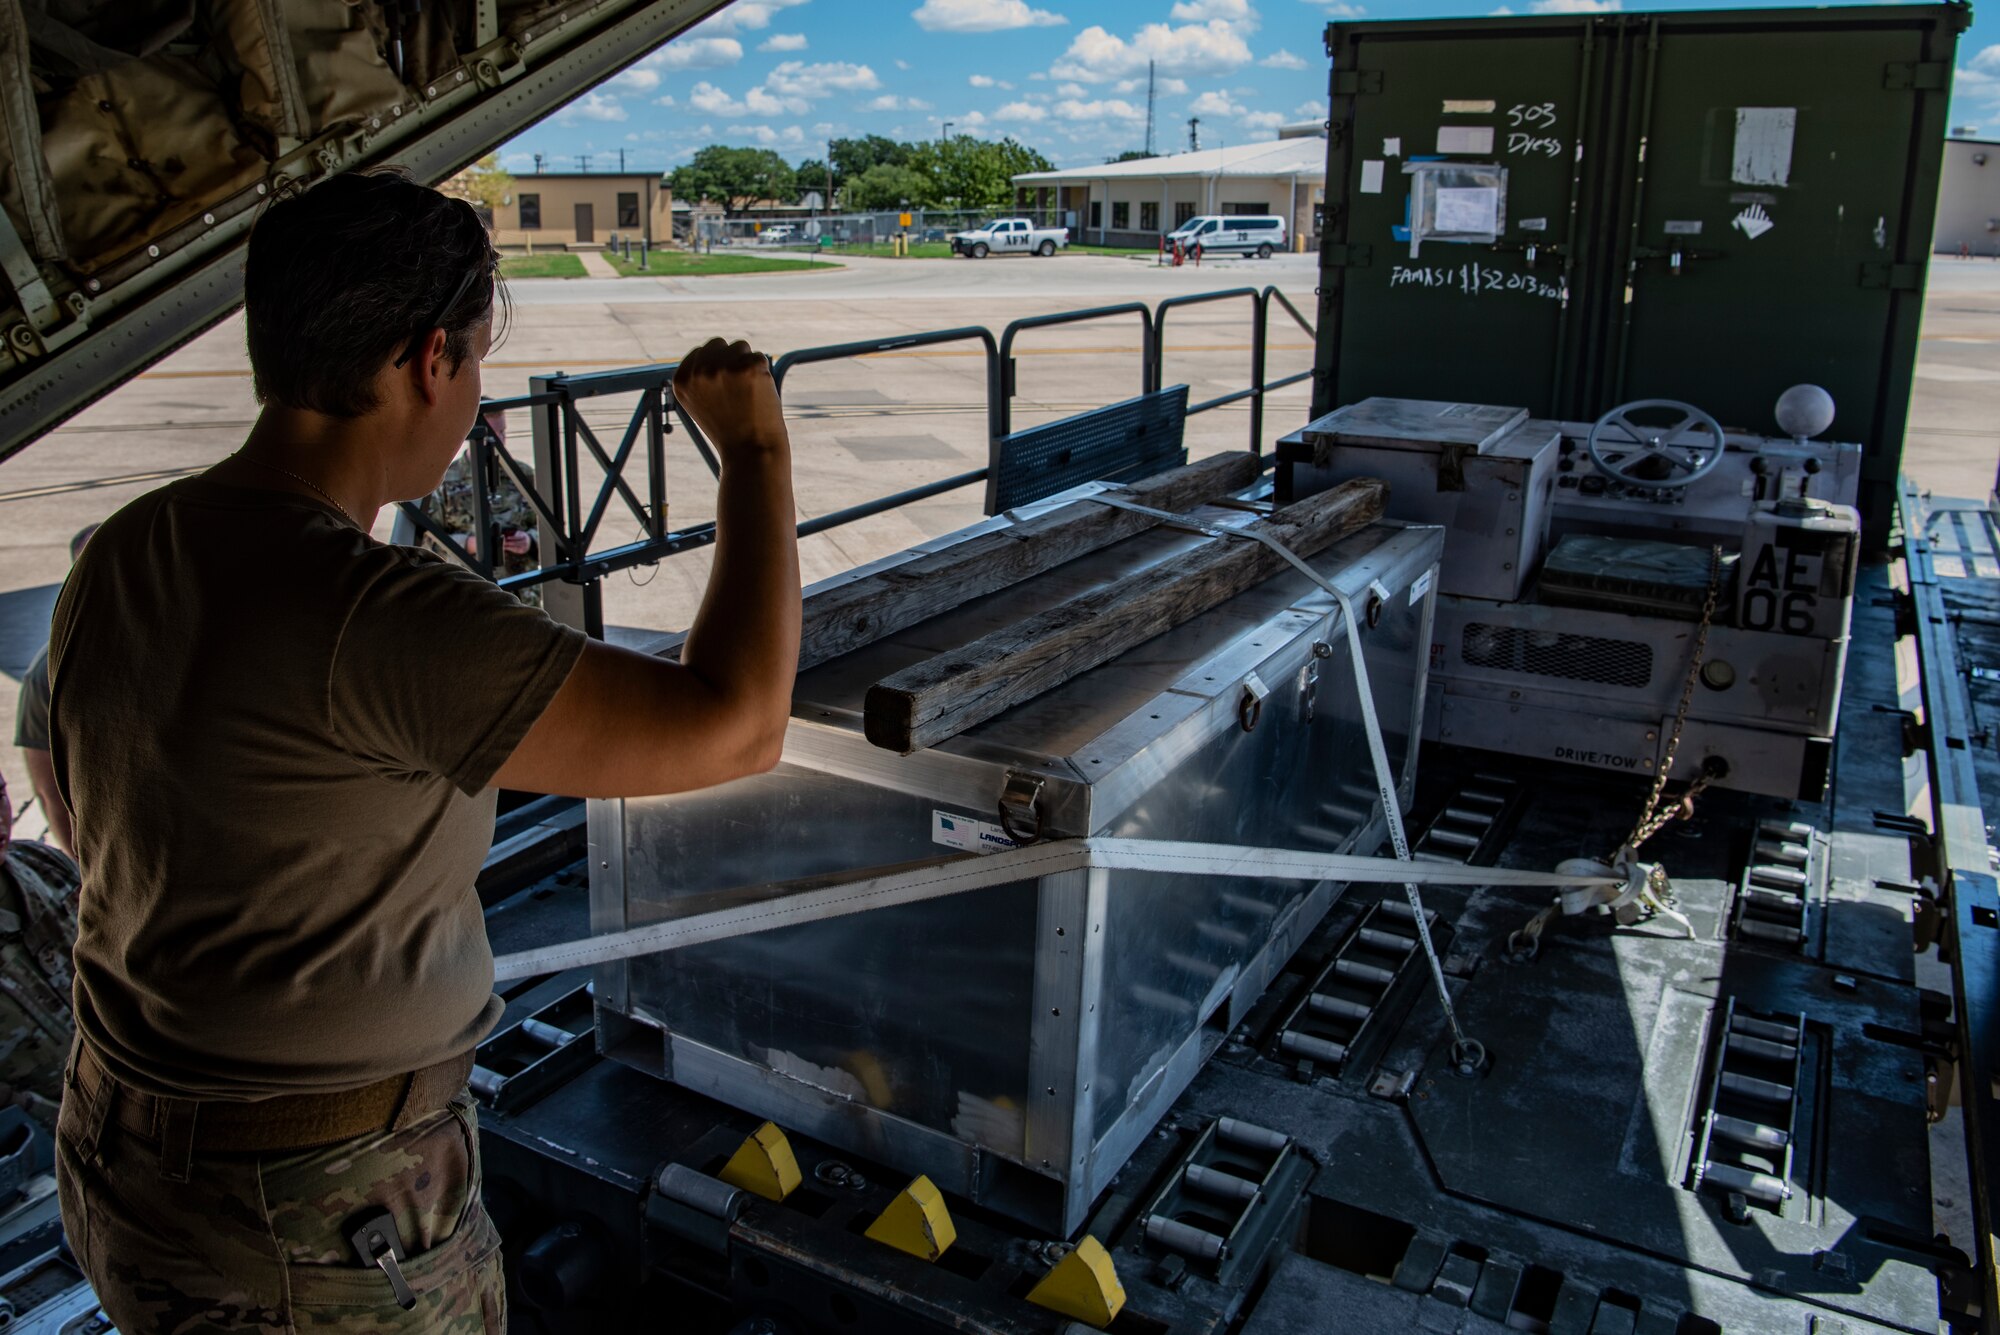 Tech. Sgt. Dani Galich, 40th Airlift Squadron tactics flight chief, loads the back of a C-130J Super Hercules during exercise Patriot Fury at Naval Air Station Fort Worth, Texas, Aug. 28, 2022. During Patriot Fury, aircrews trained by performing halo jumps, fighter integration and difficult landing situations. (U.S. Air Force photo by Airman 1st Class Ryan Hayman)